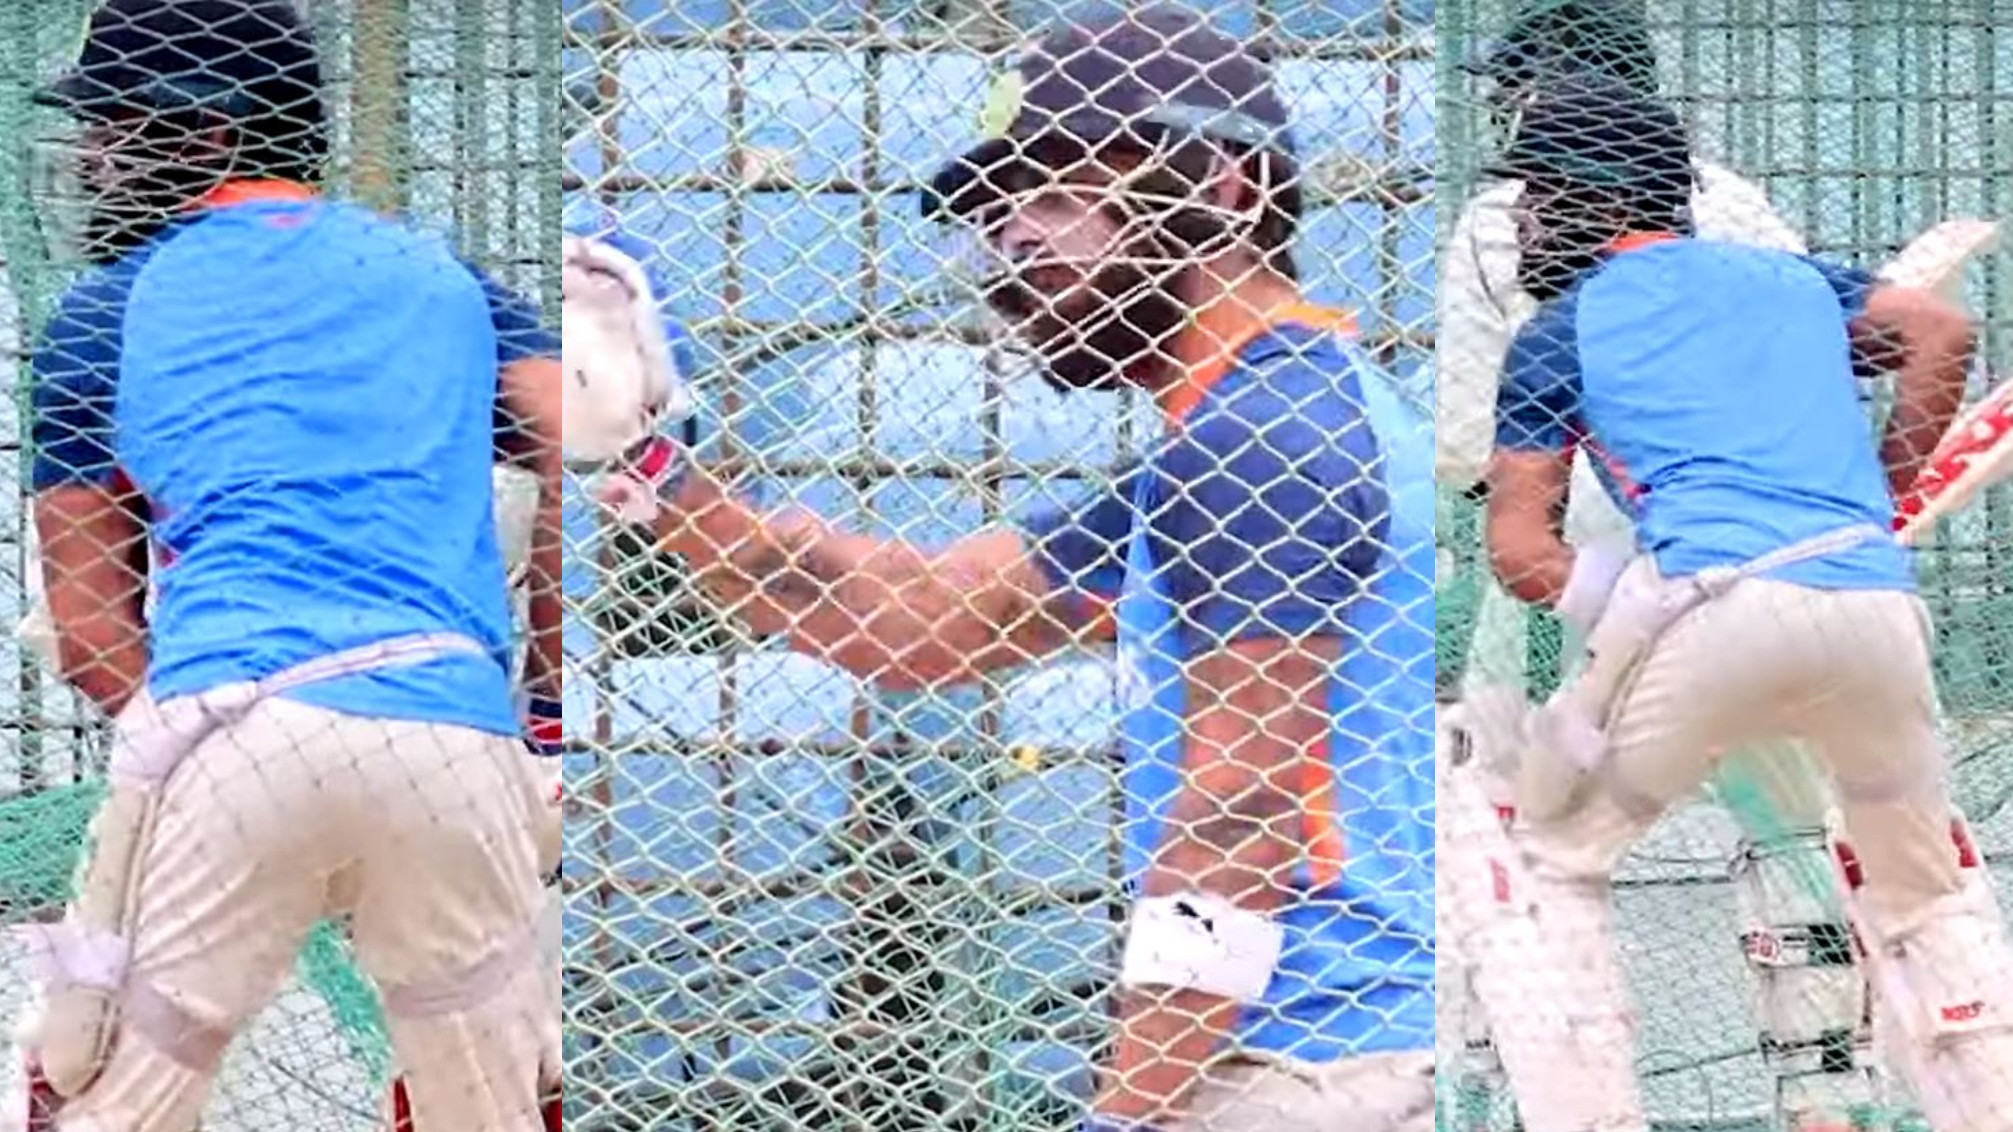 BAN v IND 2022: WATCH- Virat Kohli bats in the nets after India wins the first Test in Chattogram